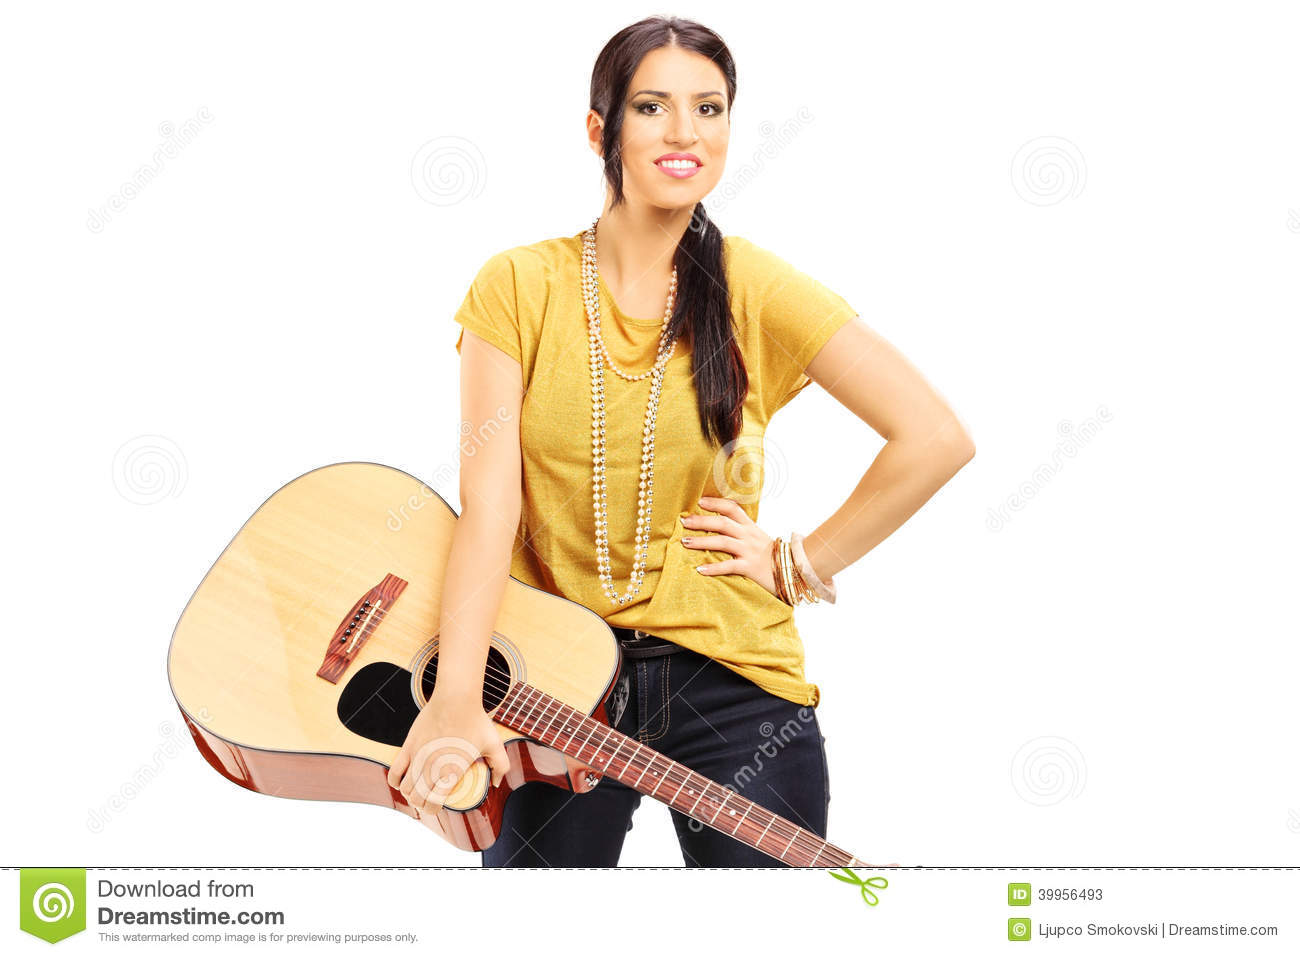 Female Musician Holding An Acoustic Guitar Stock Photo   Image